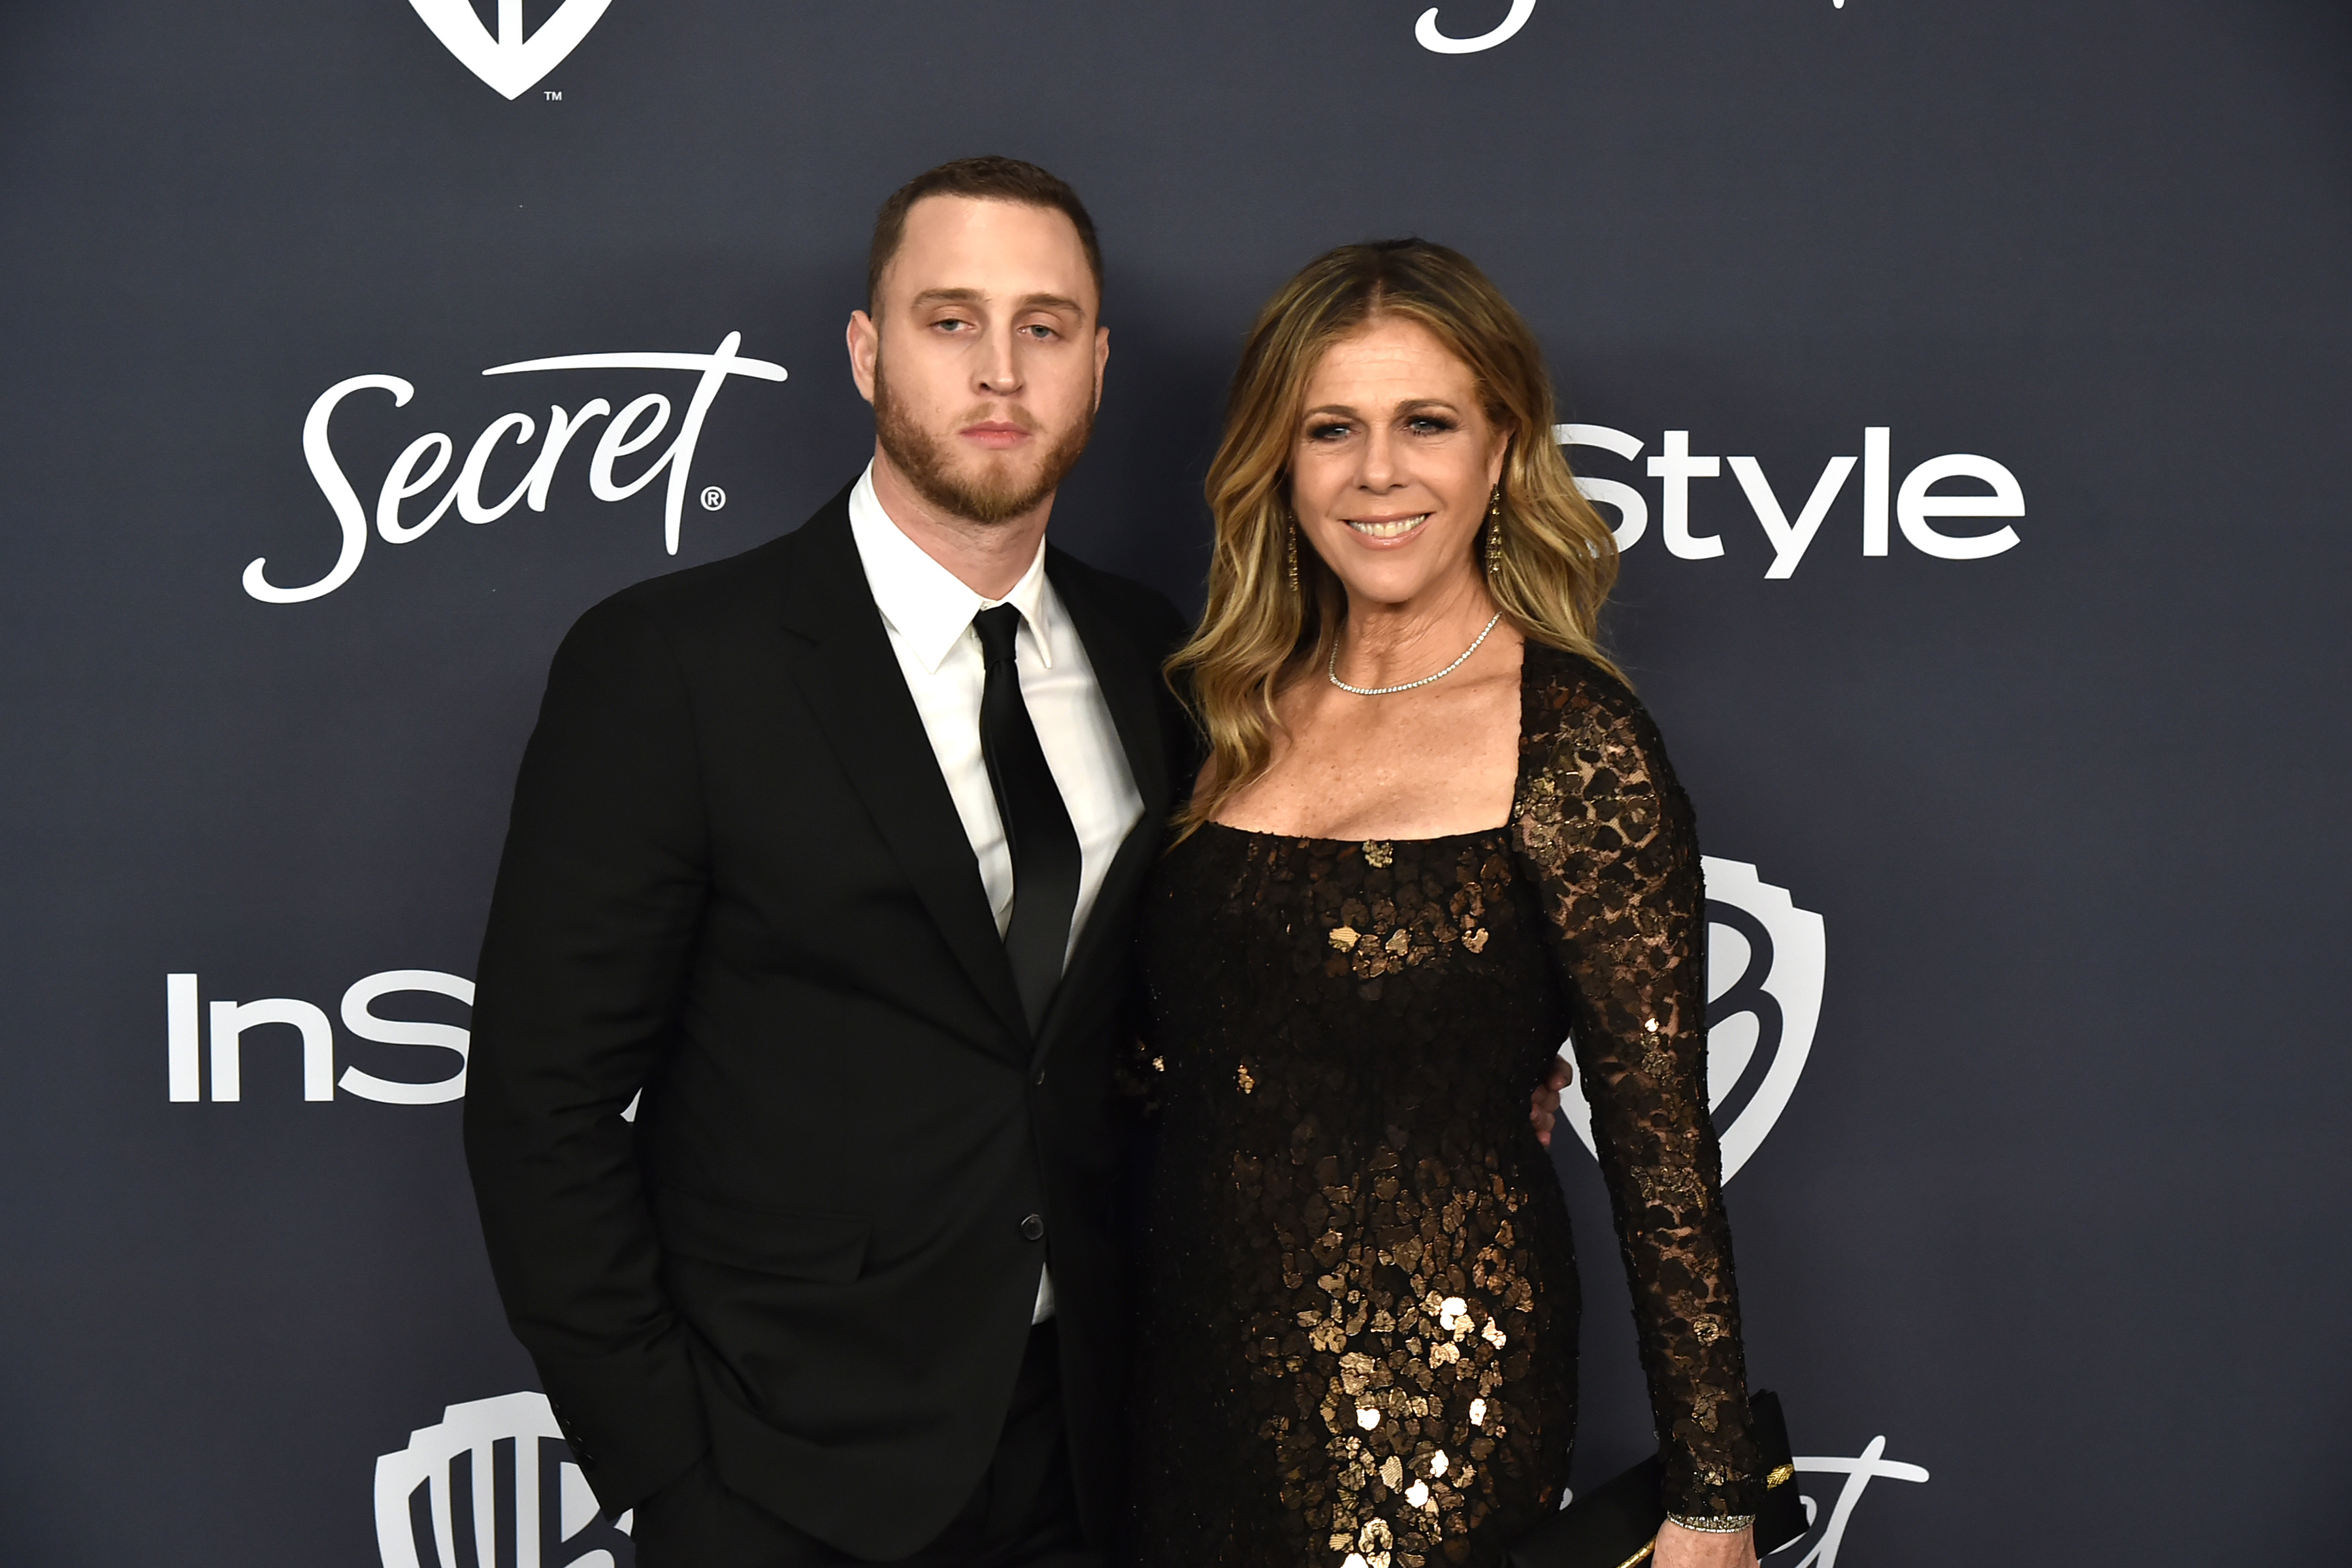 Chet Hanks and Rita Wilson attend the Warner Brothers and InStyle 21st Annual Post Golden Globes After Party on January 05, 2020 in Beverly Hills, California. In a new YouTube video posted in February 2022, Chet Hanks says growing up he didn't have a "strong male role model."